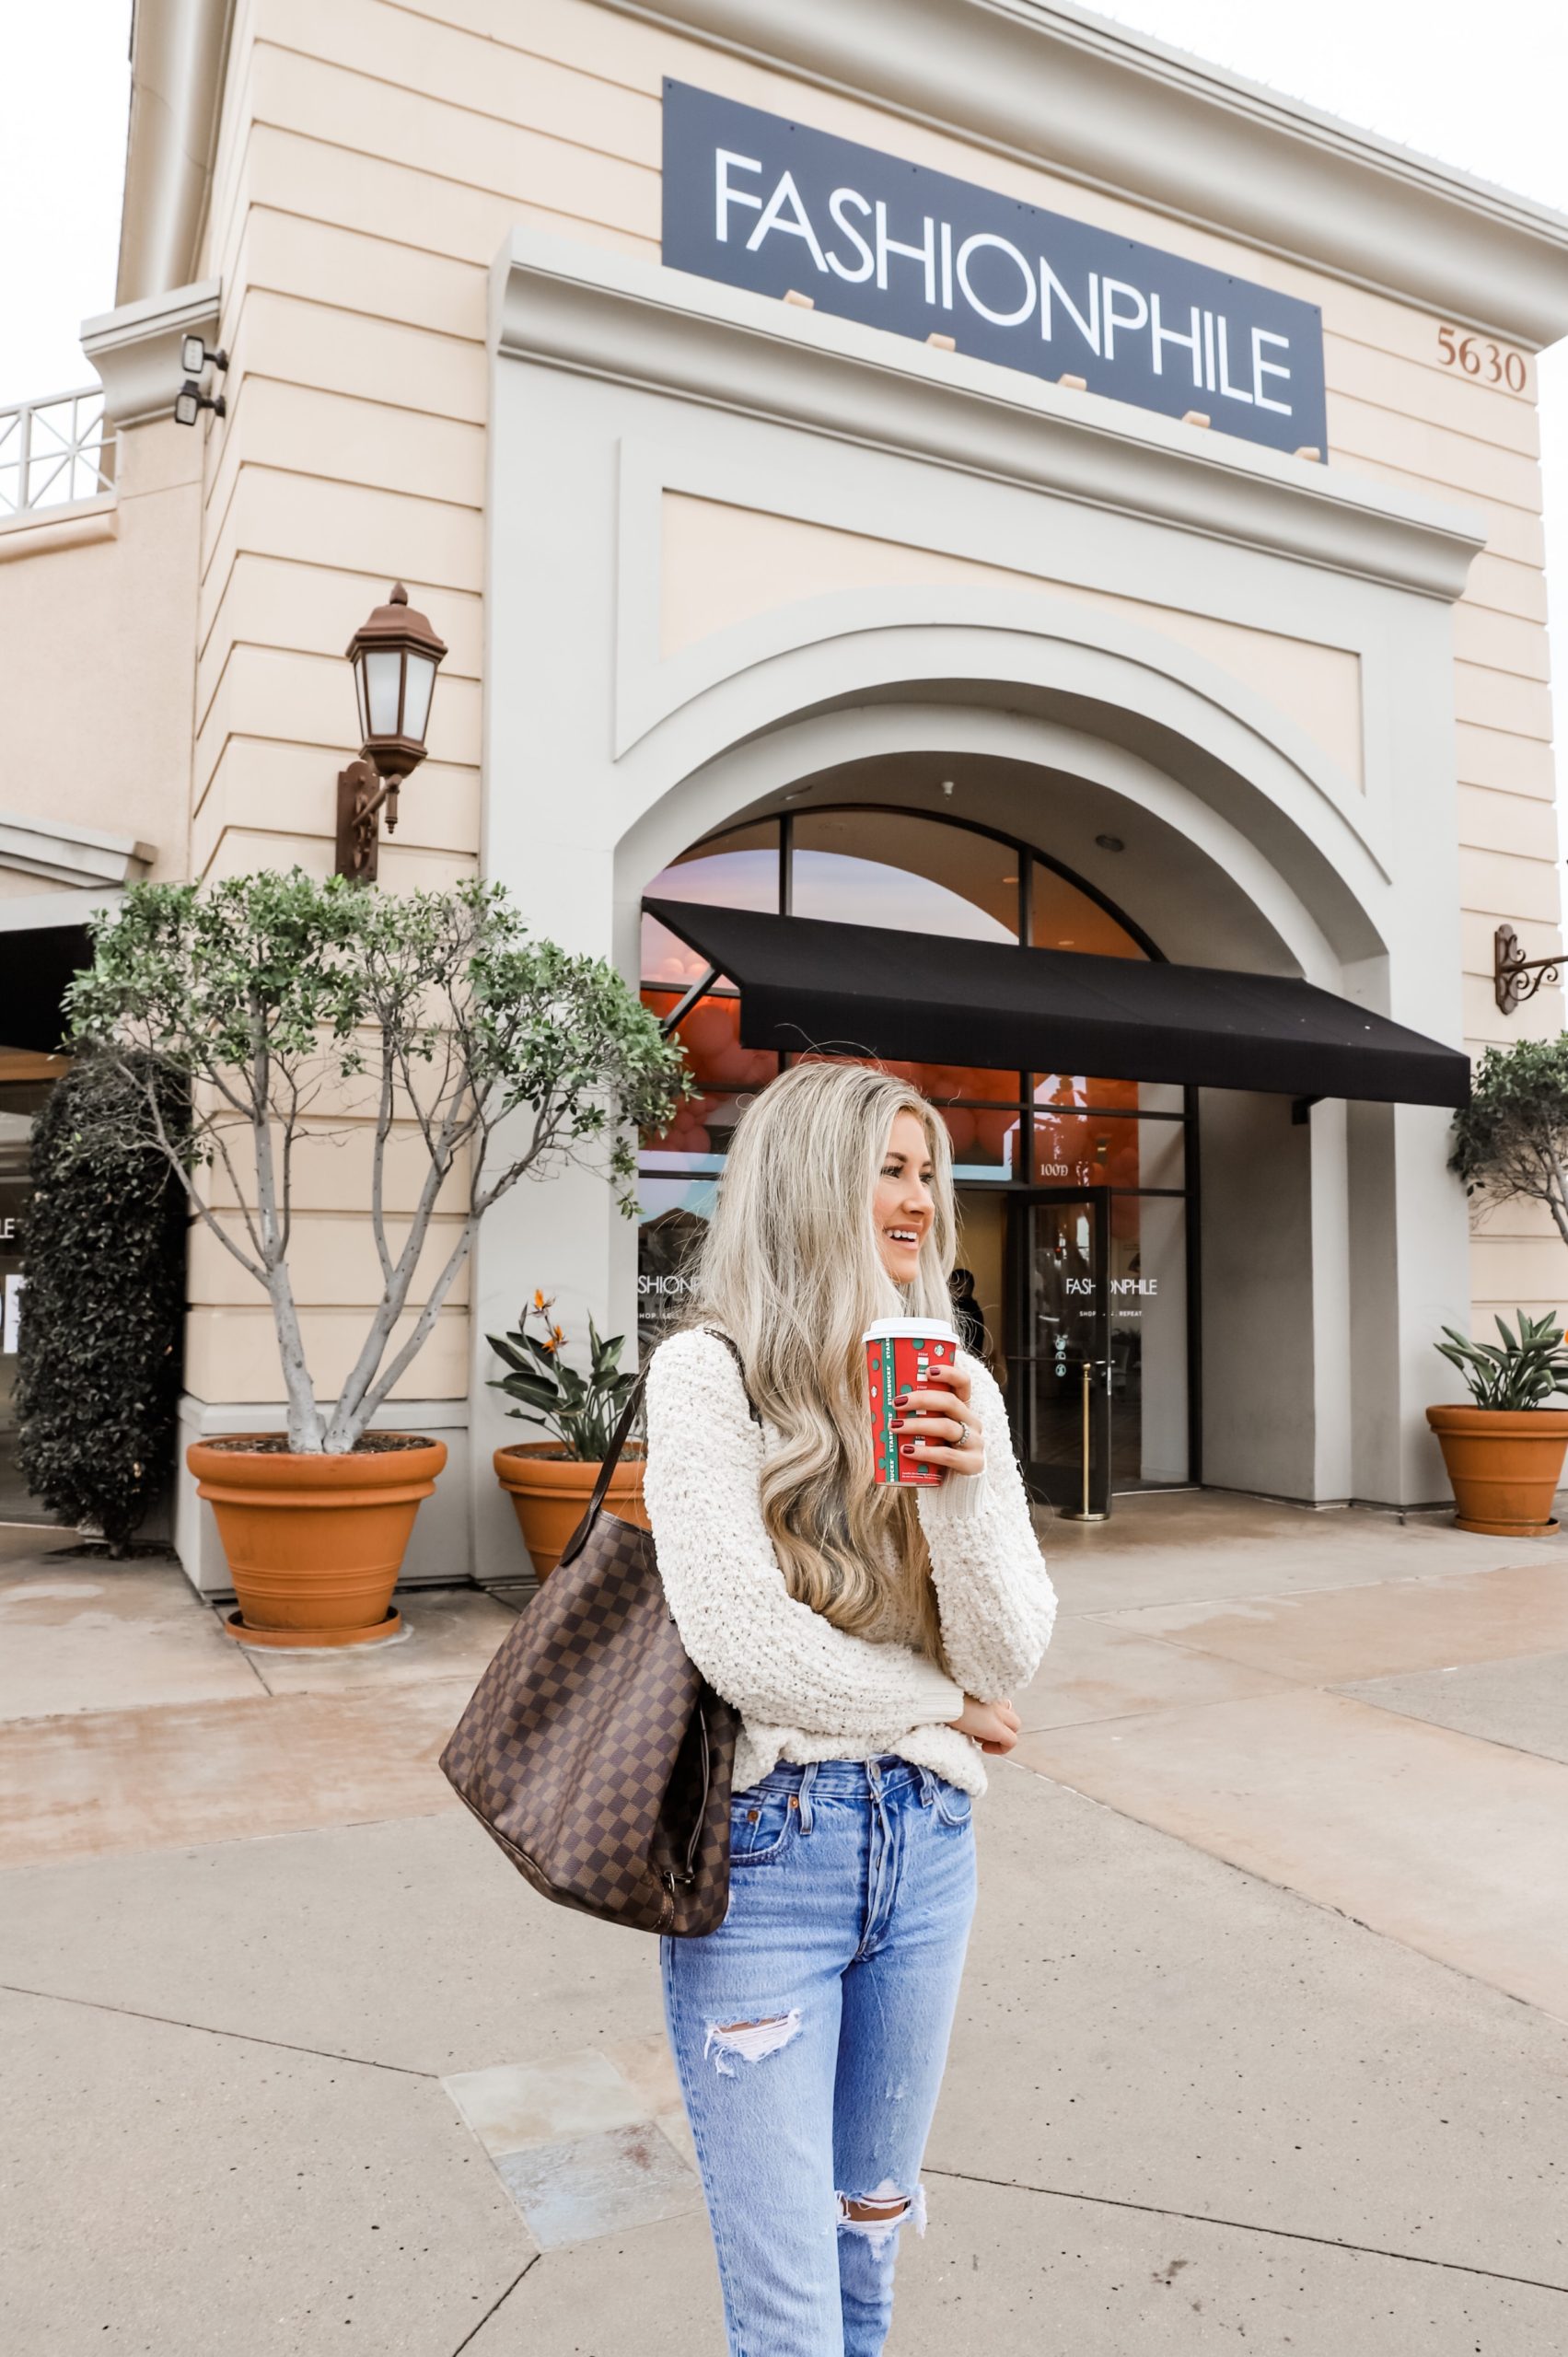 FASHIONPHILE Pop-Up At Carlsbad Premium Outlets - Kristy By The Sea